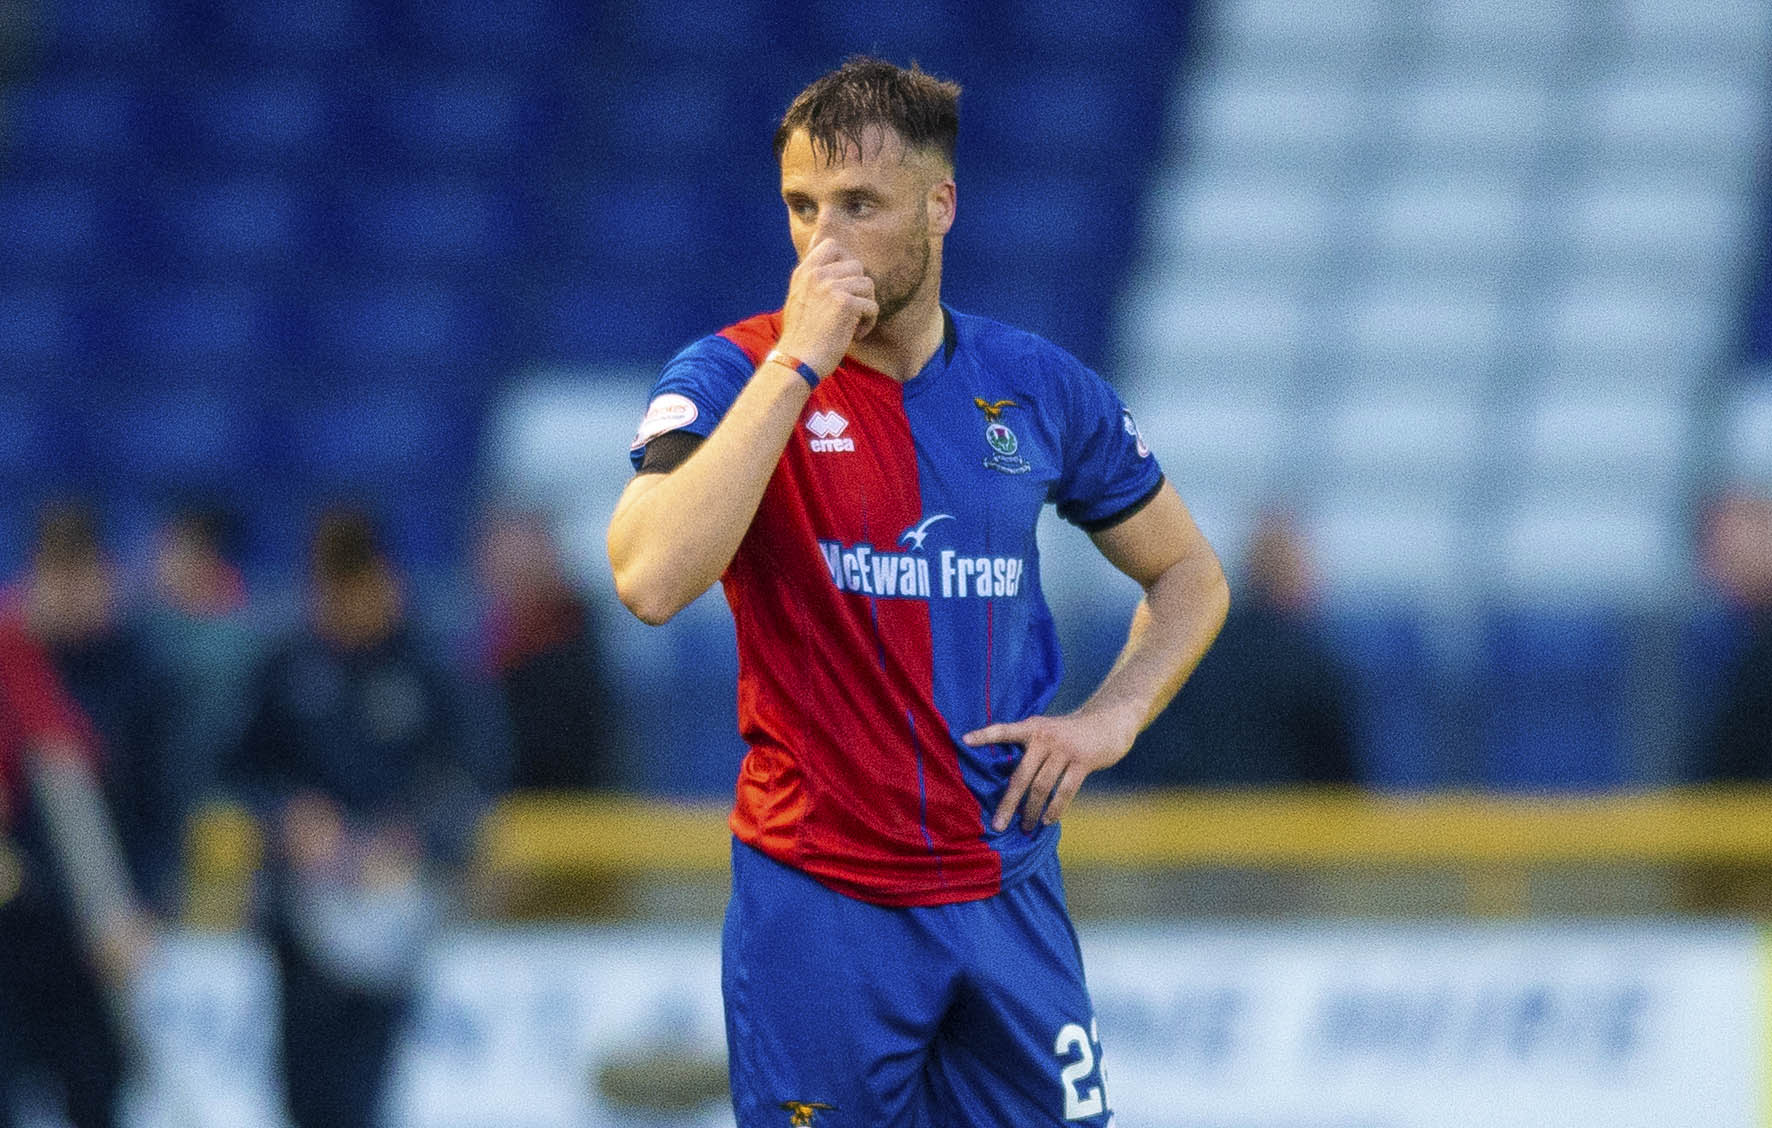 14/05/19 LADBROKES PREMIERSHIP PLAY-OFF SEMI FINAL 1ST LEG
INVERNESS CALEDONIAN THISTLE v DUNDEE UNITED
TULLOCH CALEDONIAN STADIUM - INVERNESS
Inverness Brad mcKay looks dejected at full-time.